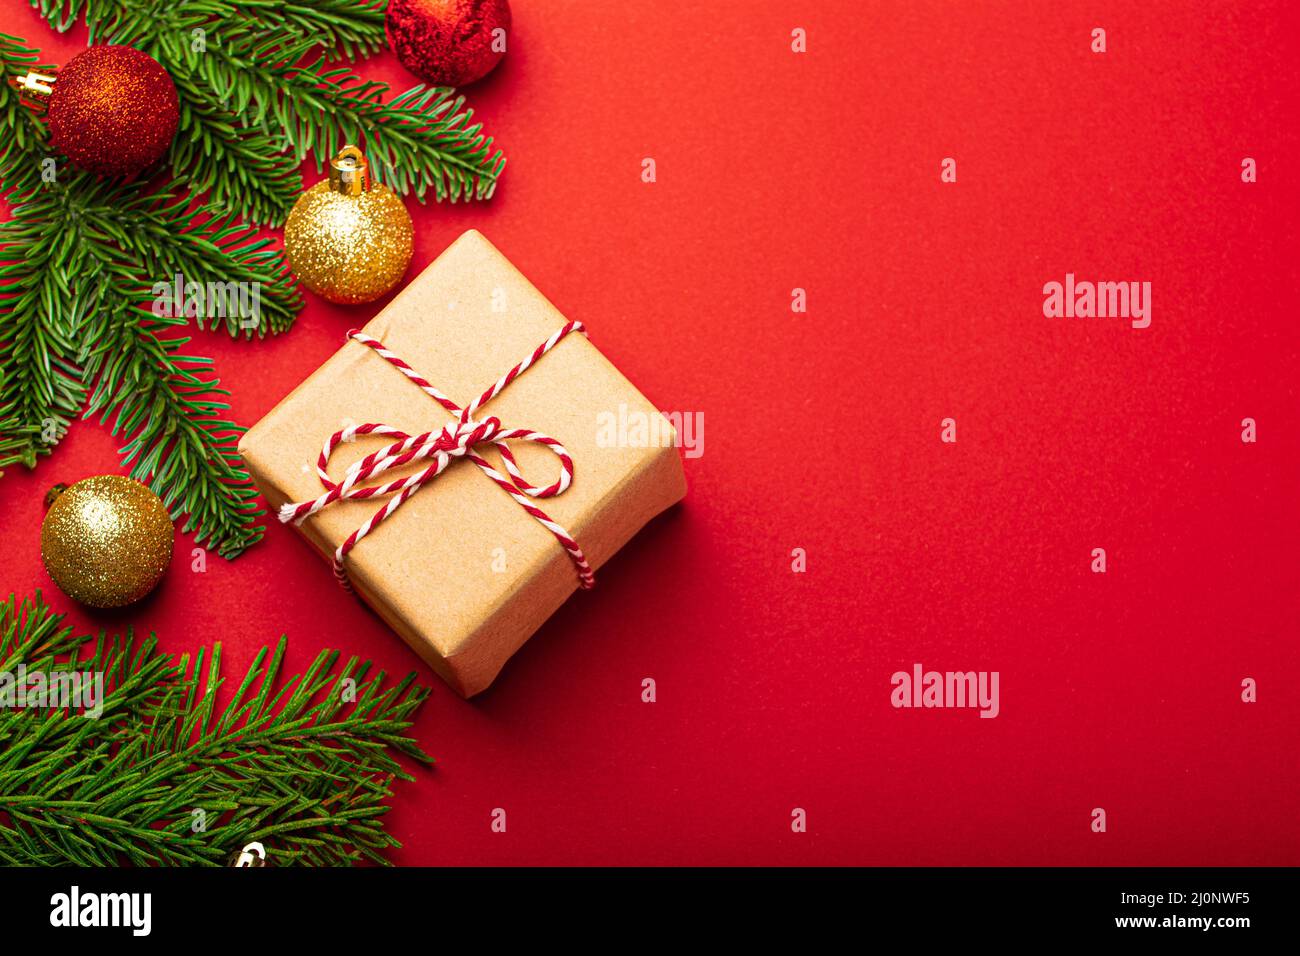 Christmas decorations, fir tree on red background copy space Stock Photo